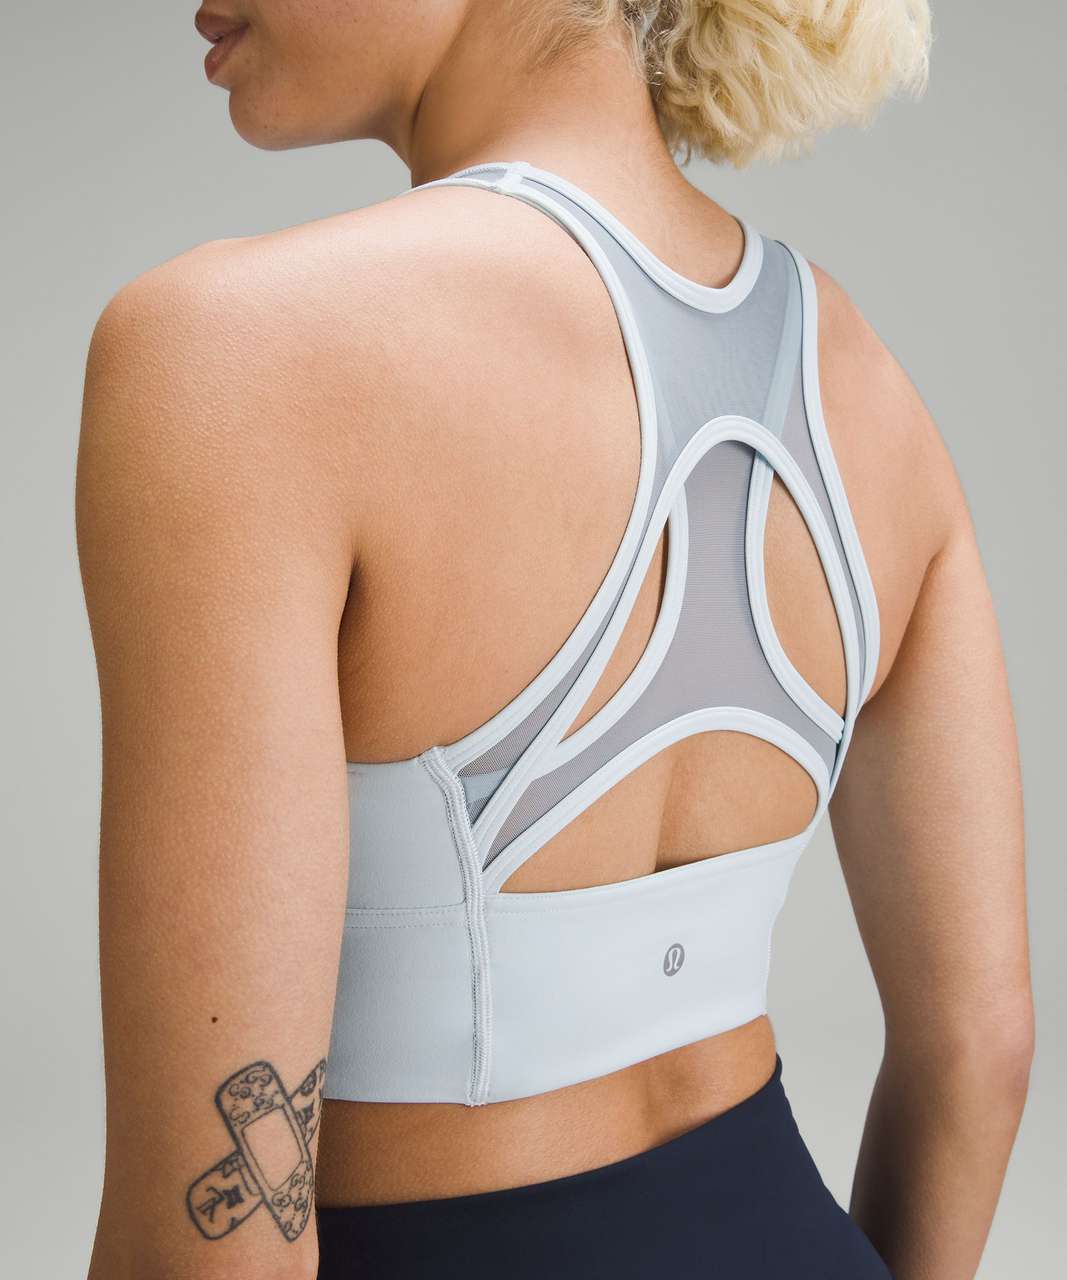 Meet the bra with a new mesh back - lululemon Email Archive